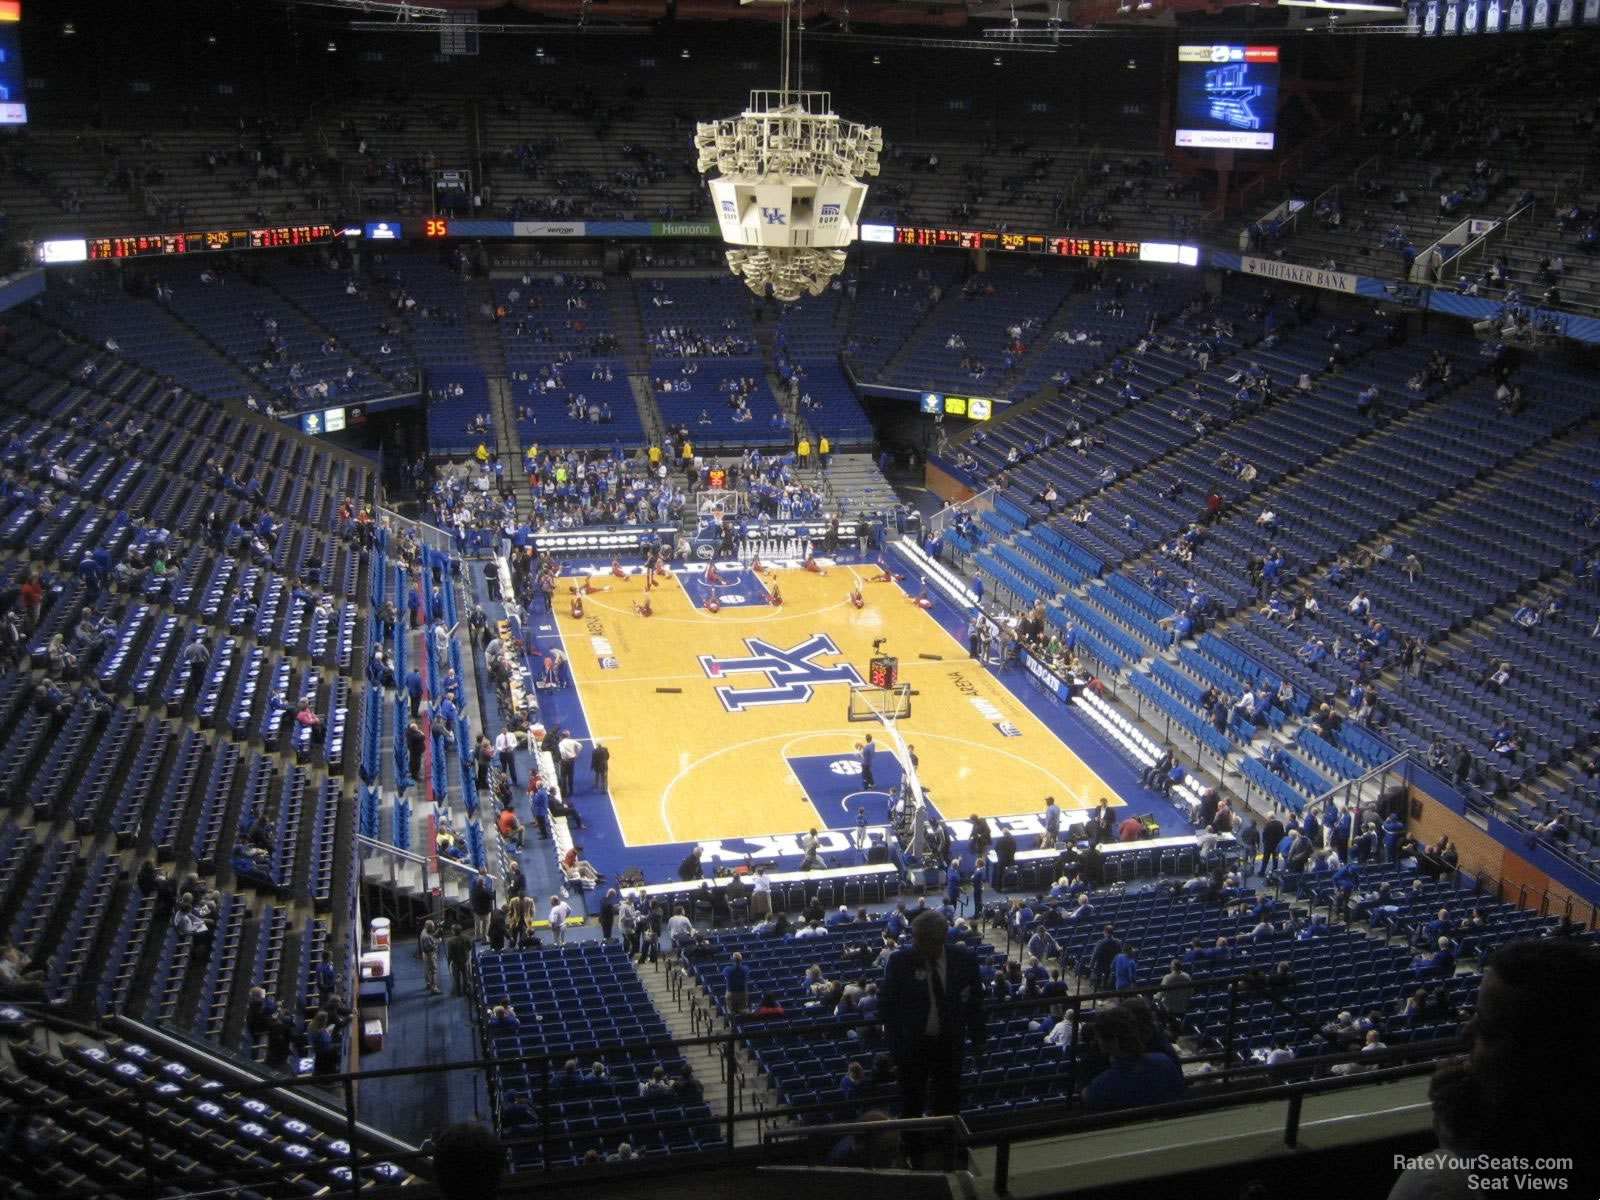 Rupp Arena Section 224 - RateYourSeats.com